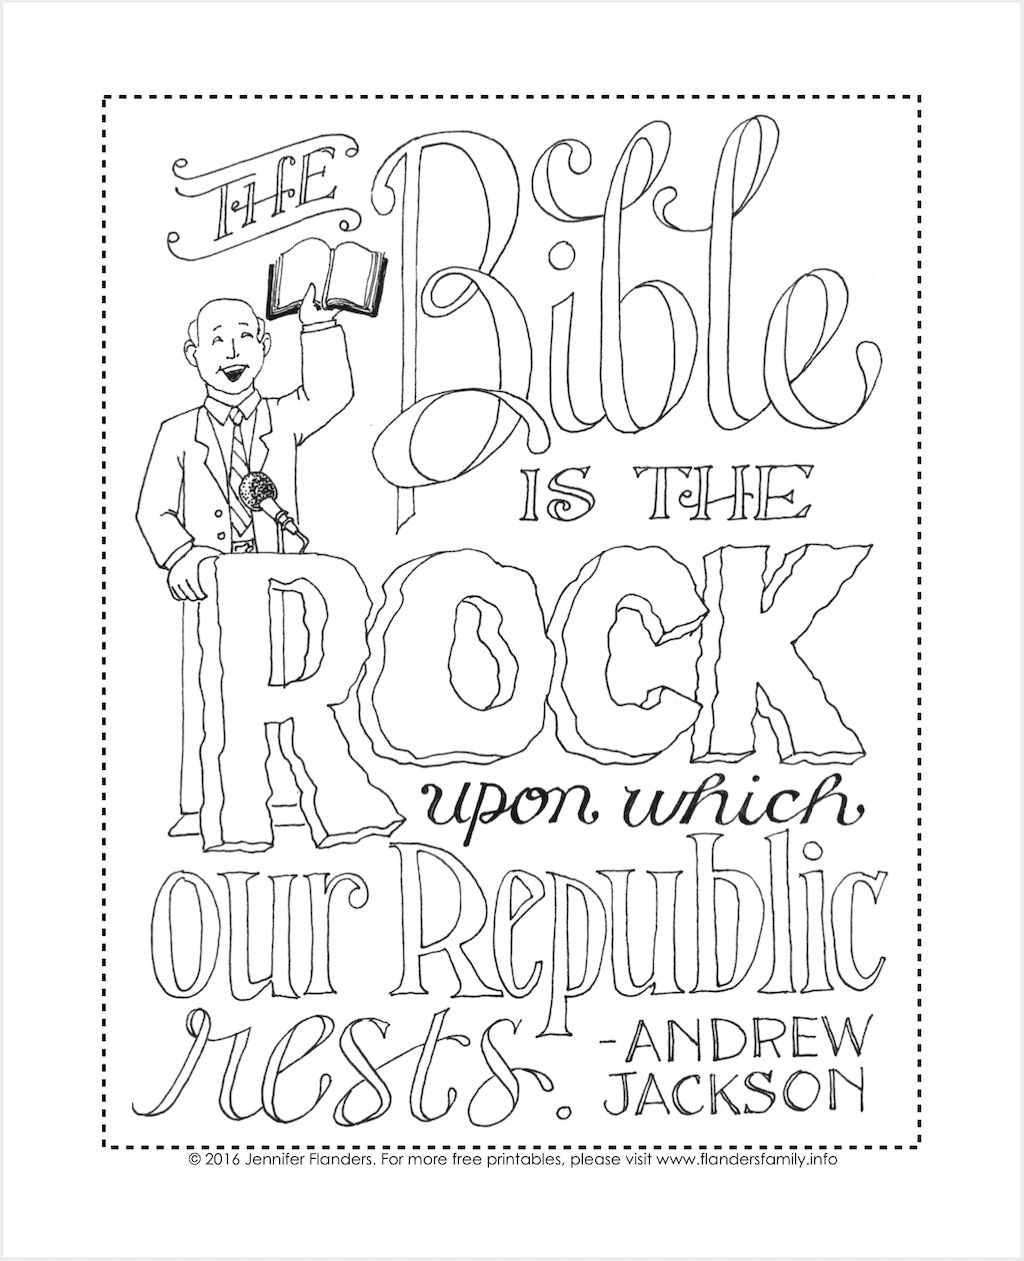 Download Andrew Jackson Quote Coloring Page Flanders Family Homelife